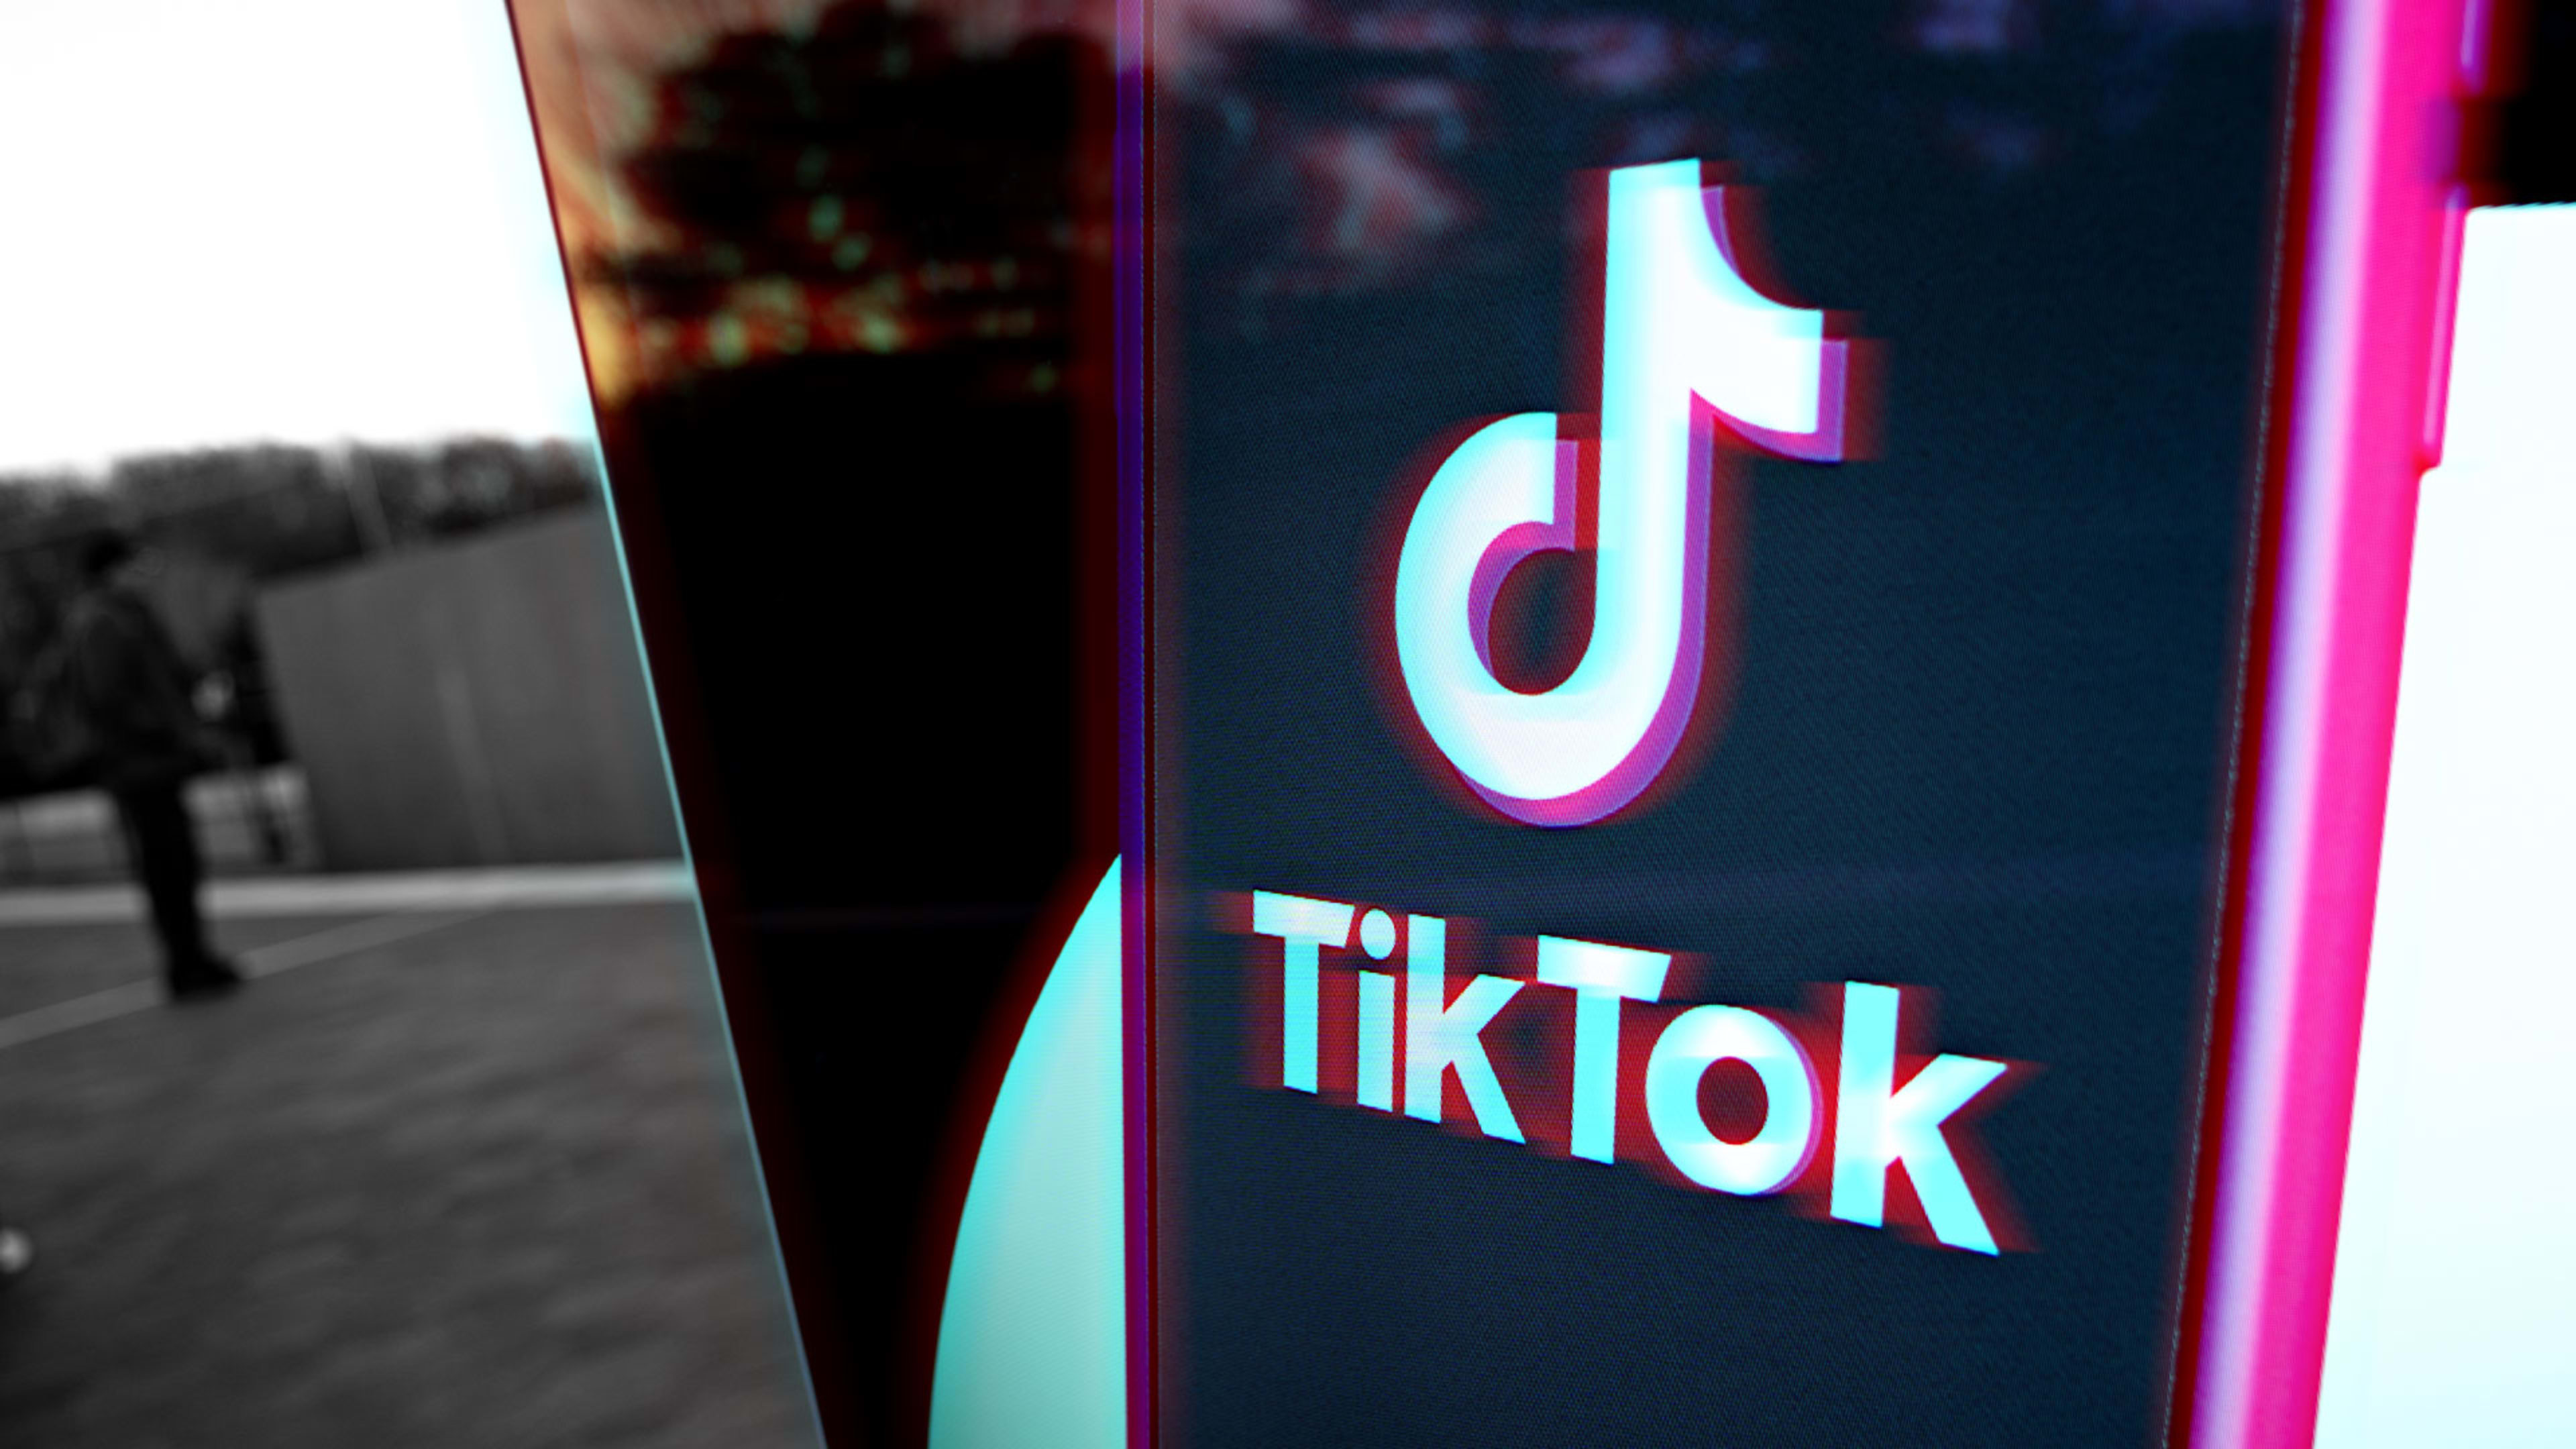 TikTok owner ByteDance has an AI play—and U.S. lawmakers won’t like it